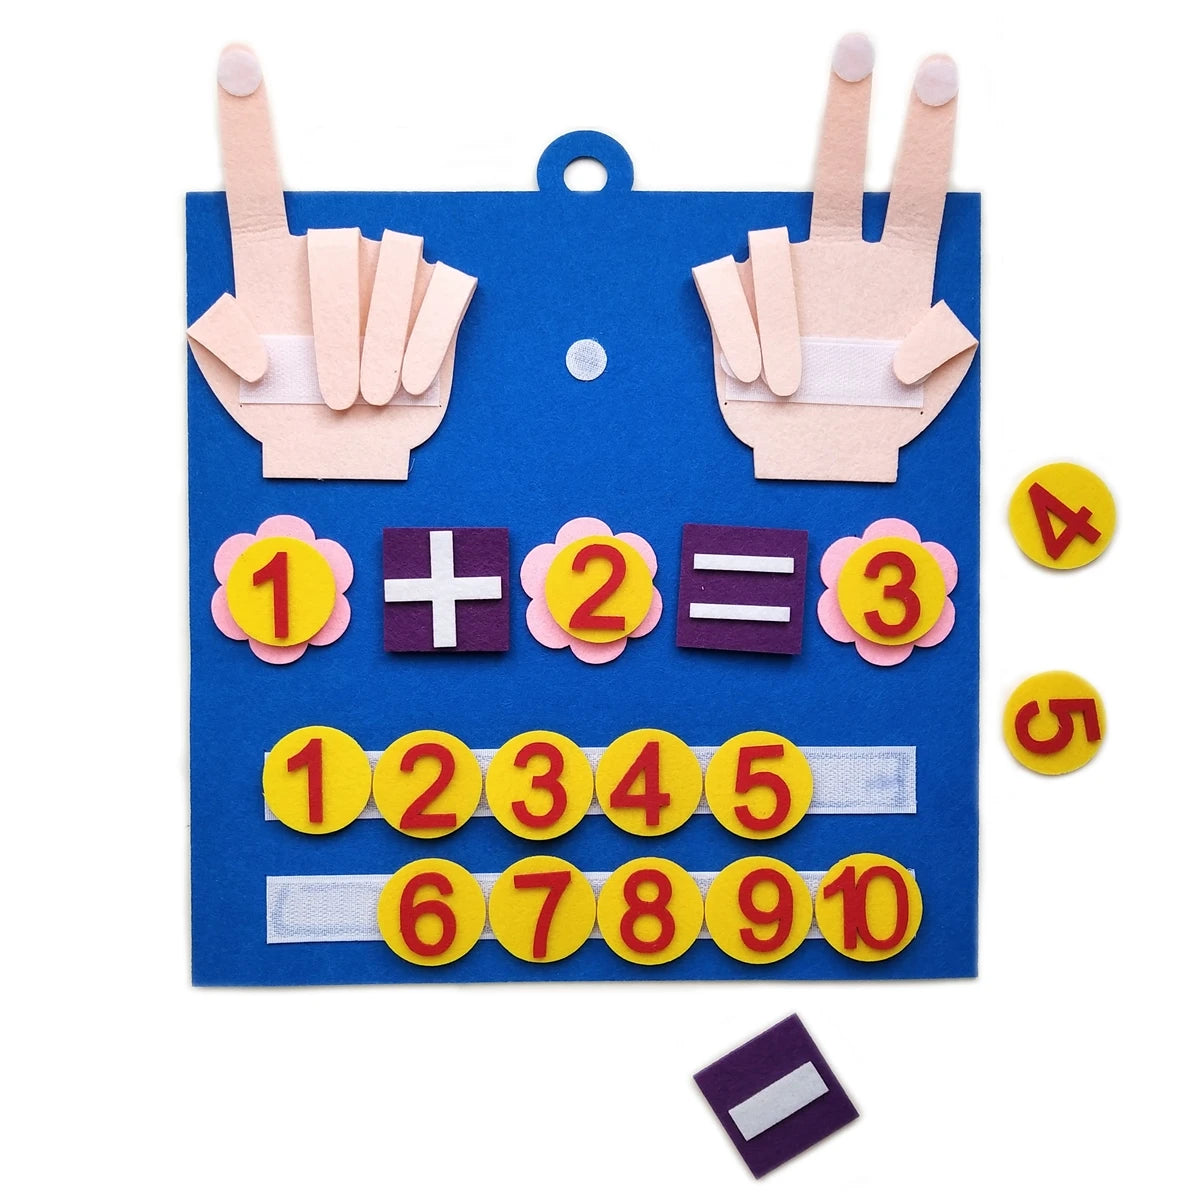 Felt Finger Numbers Math Counting